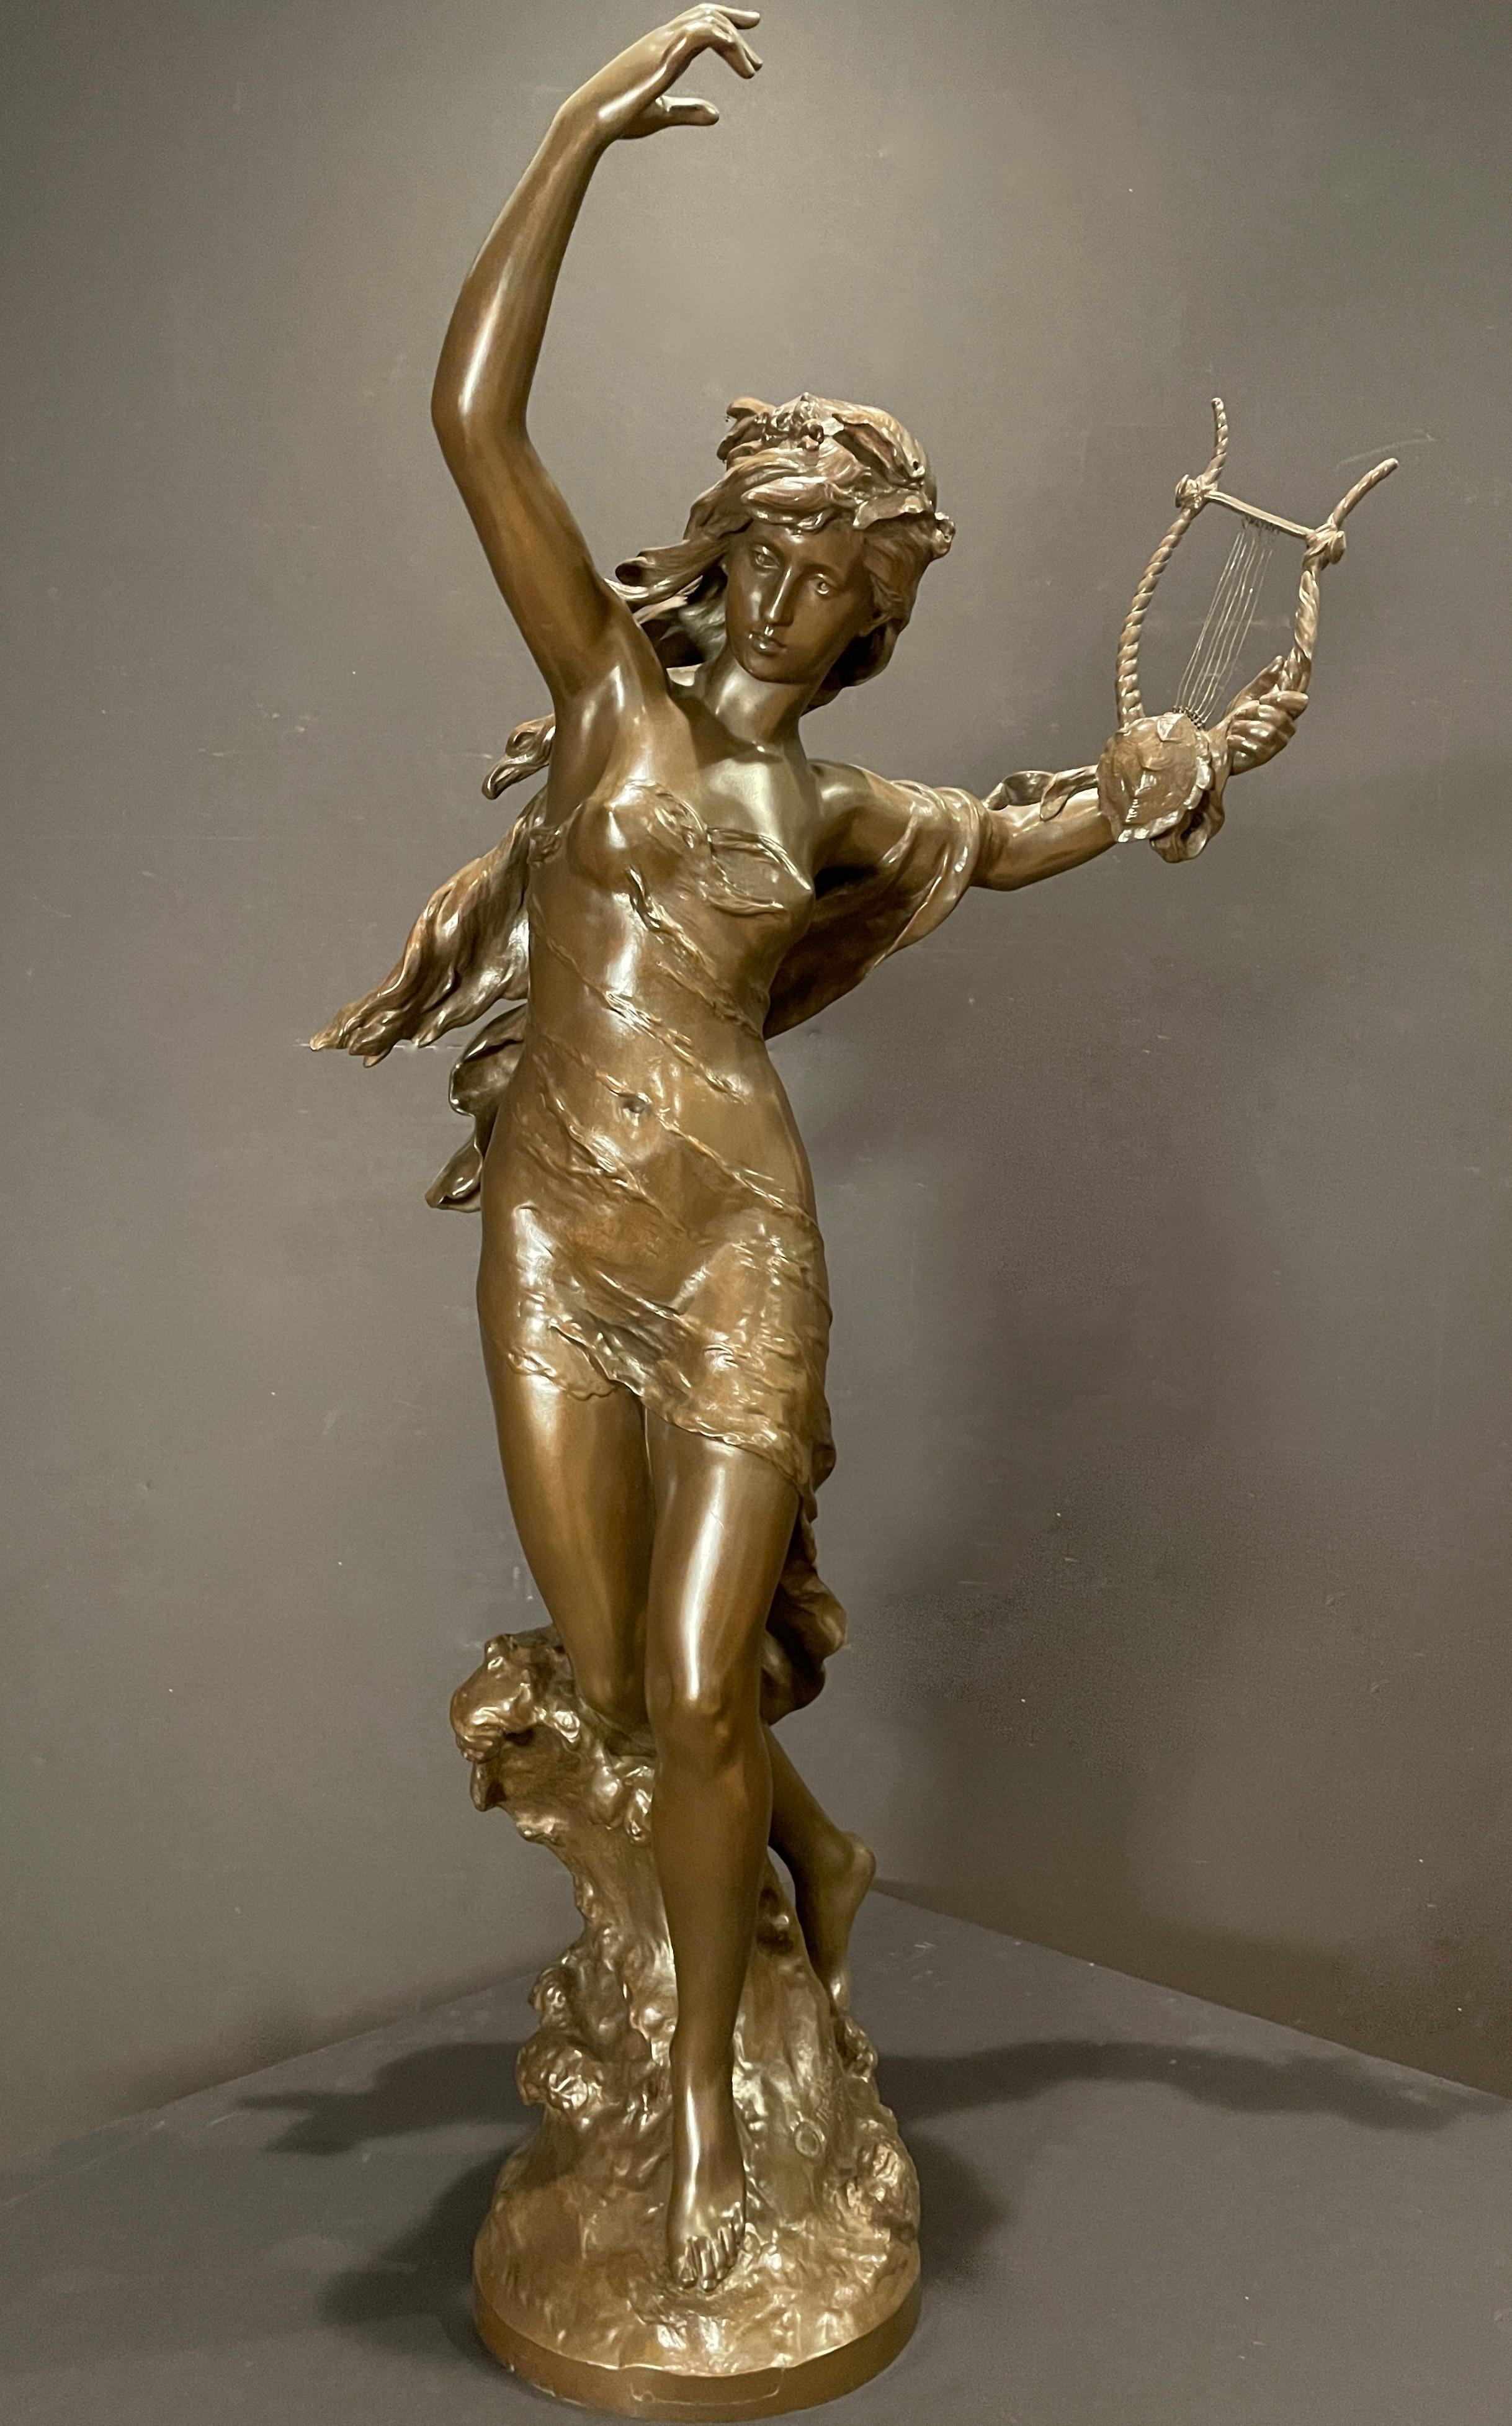 Mathurin Moreau (French, 1822-1912), Danseuse a la Lyre, a bronze figure of a woman with her arms raised holding a lyre, signed 